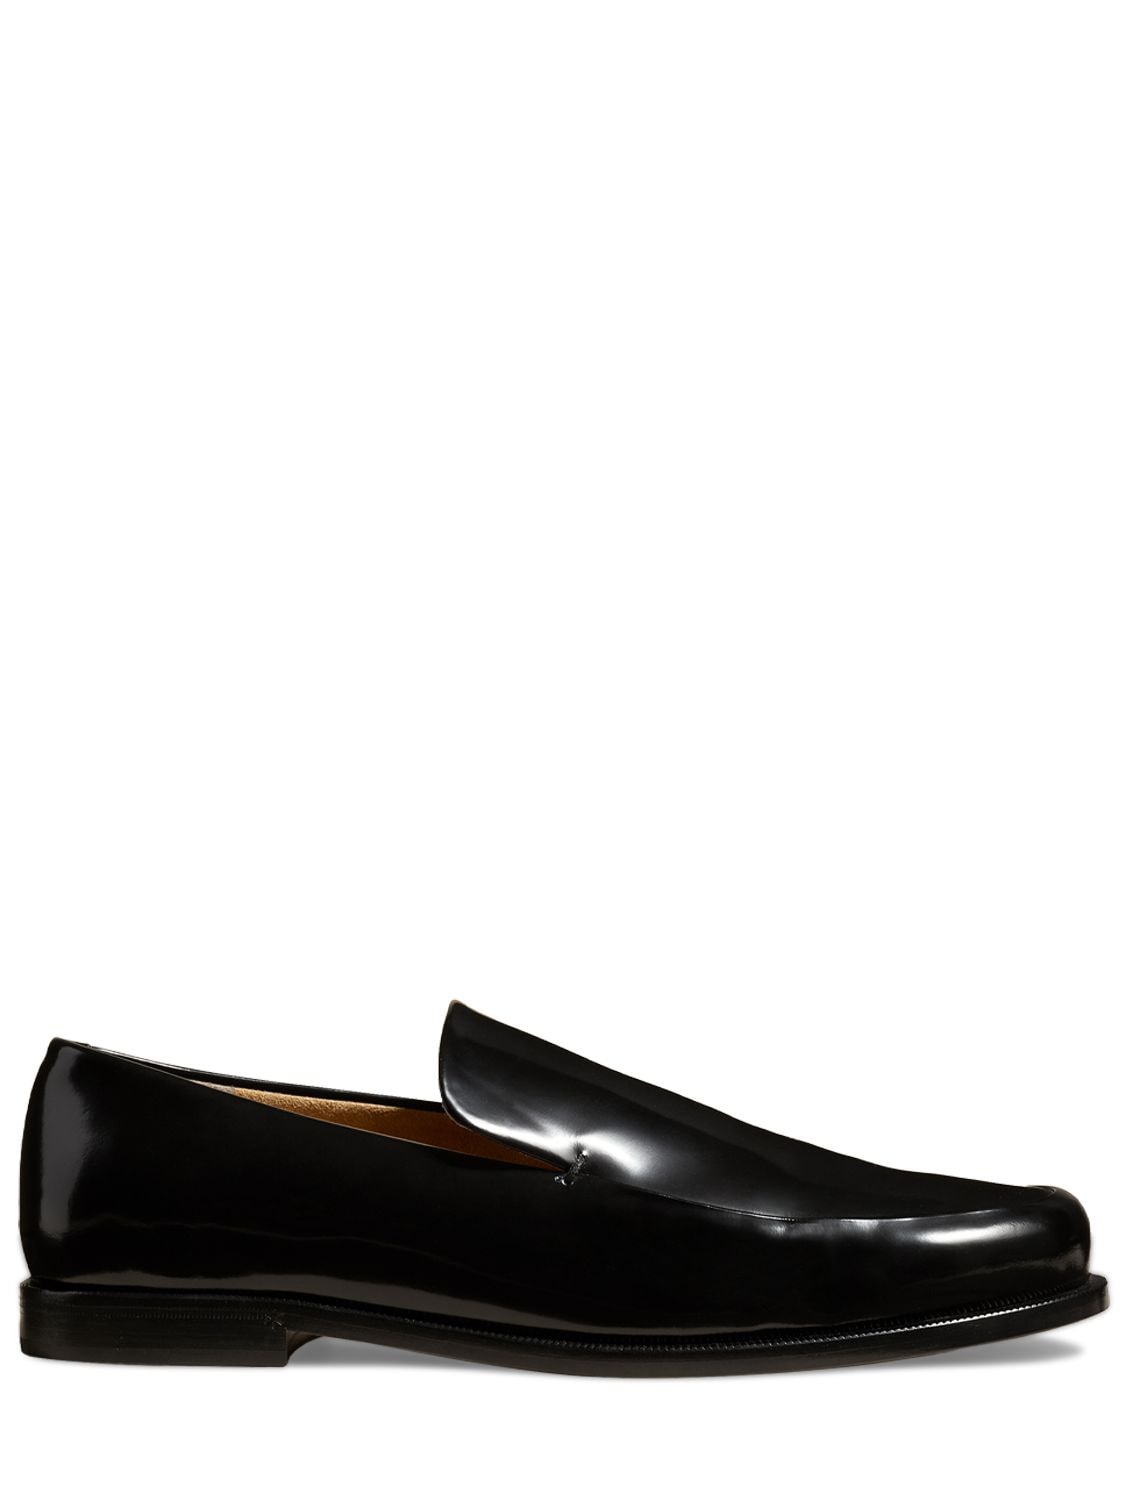 KHAITE 20mm Alessio Leather Loafers